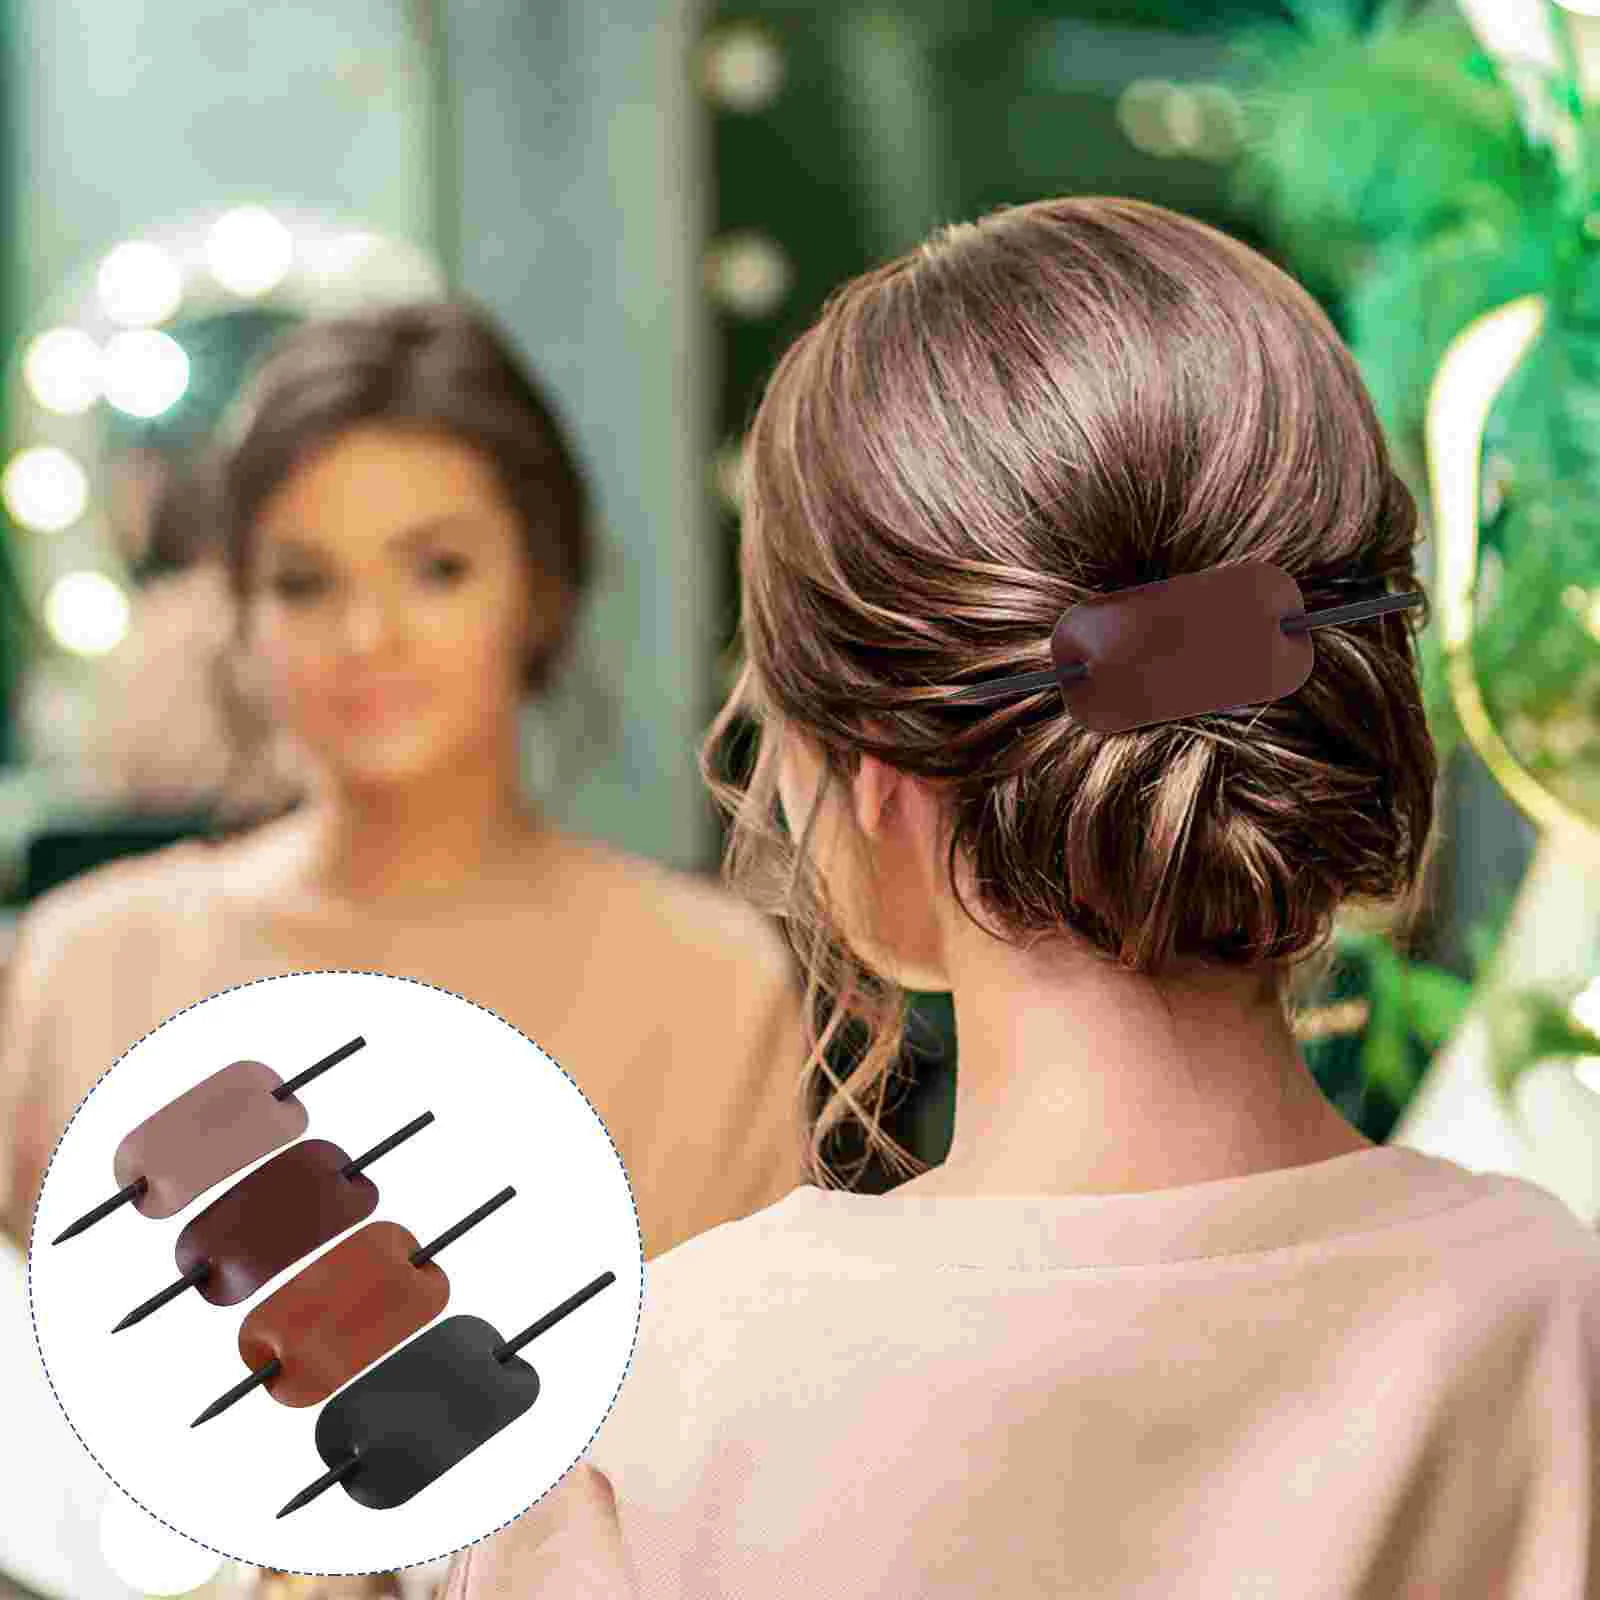 4 Pcs Hairpin Tiara Wood Bun Hair Pin Stick with Girl Chignon Accessories Beech Ponytail Miss Simple wood headband holder hair accessory scrunchie chains bracelets display organizer stand for teen girl women gifts